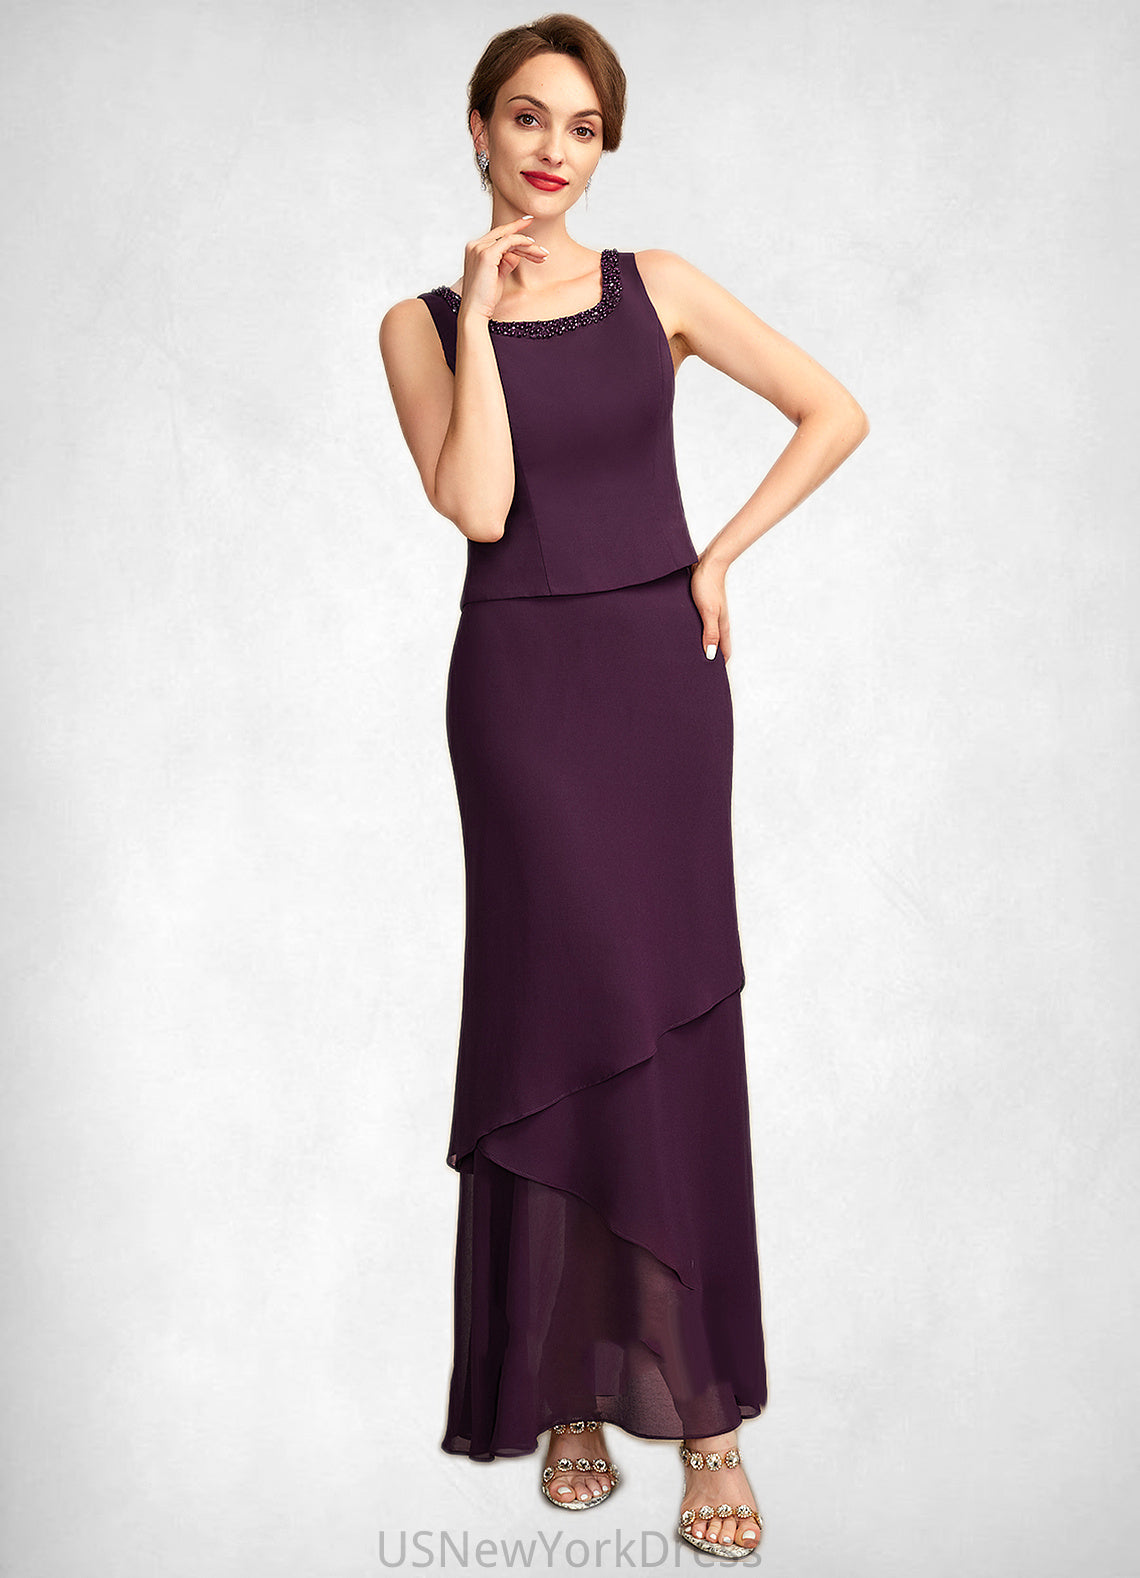 Ruby Sheath/Column Scoop Neck Ankle-Length Chiffon Mother of the Bride Dress With Beading Sequins DJ126P0015024